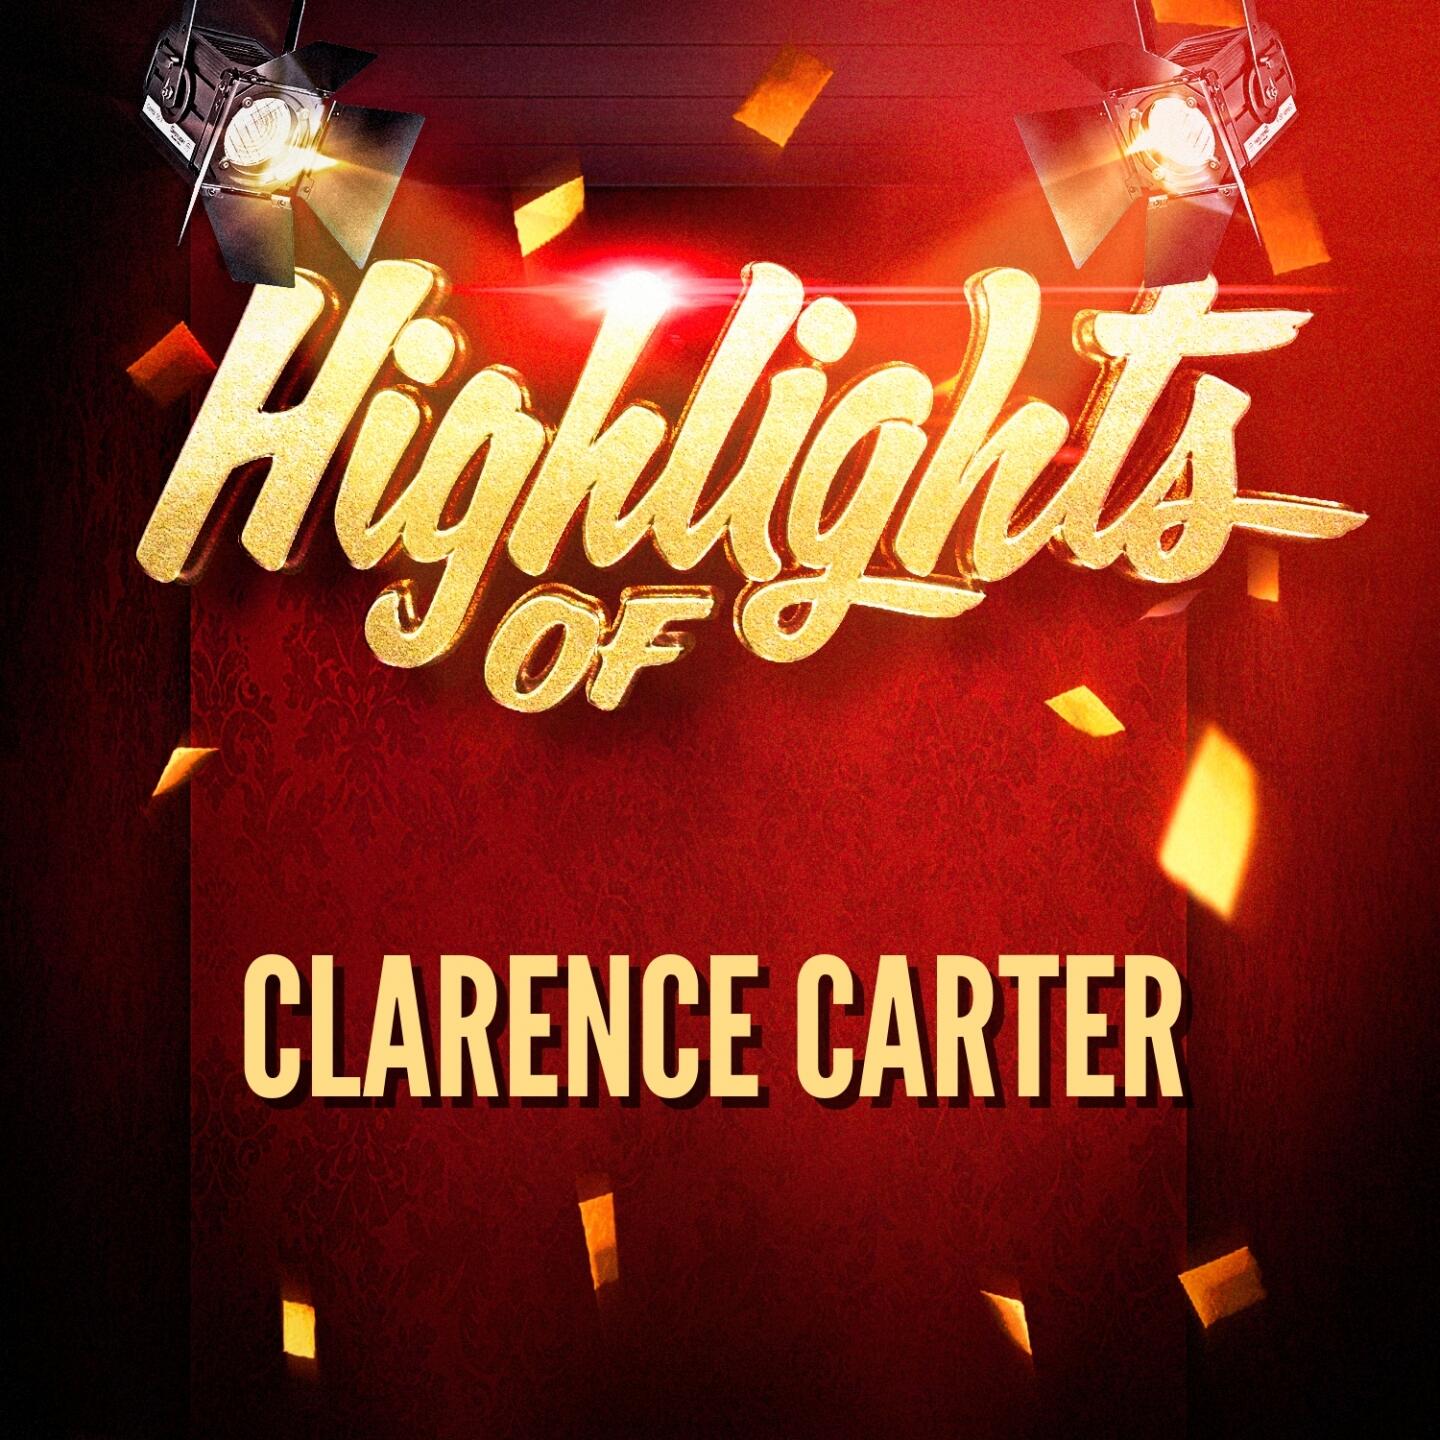 Clarence Carter - Highlights of Clarence Carter | iHeart